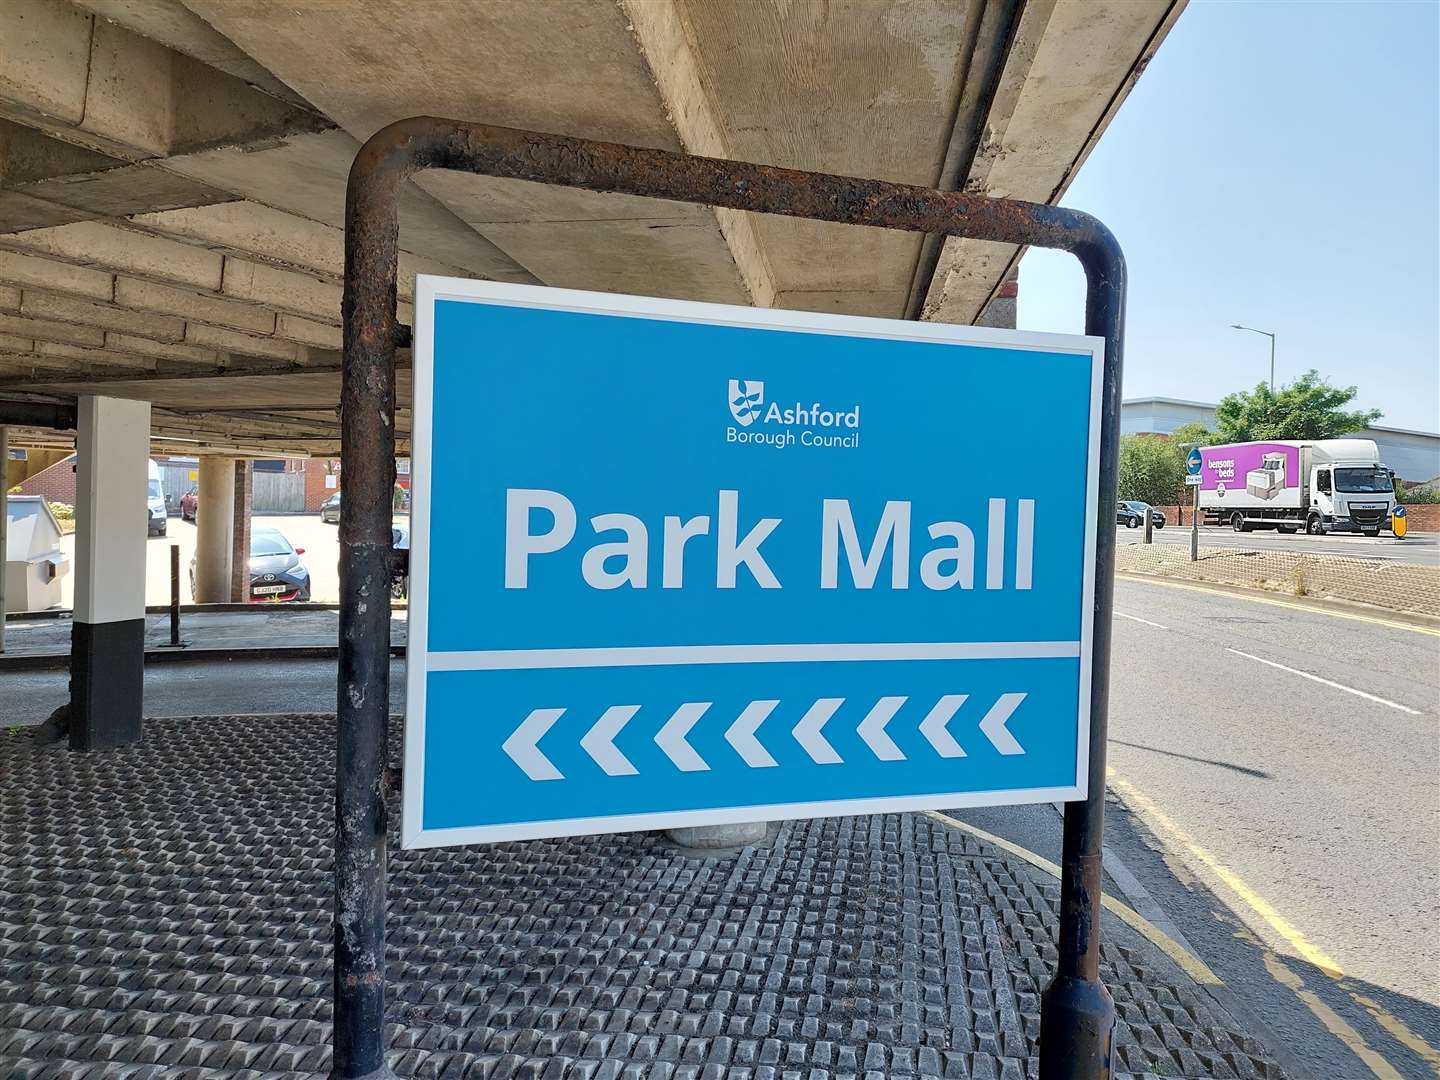 The Park Mall car park reopened this summer but the top floor remains prohibited